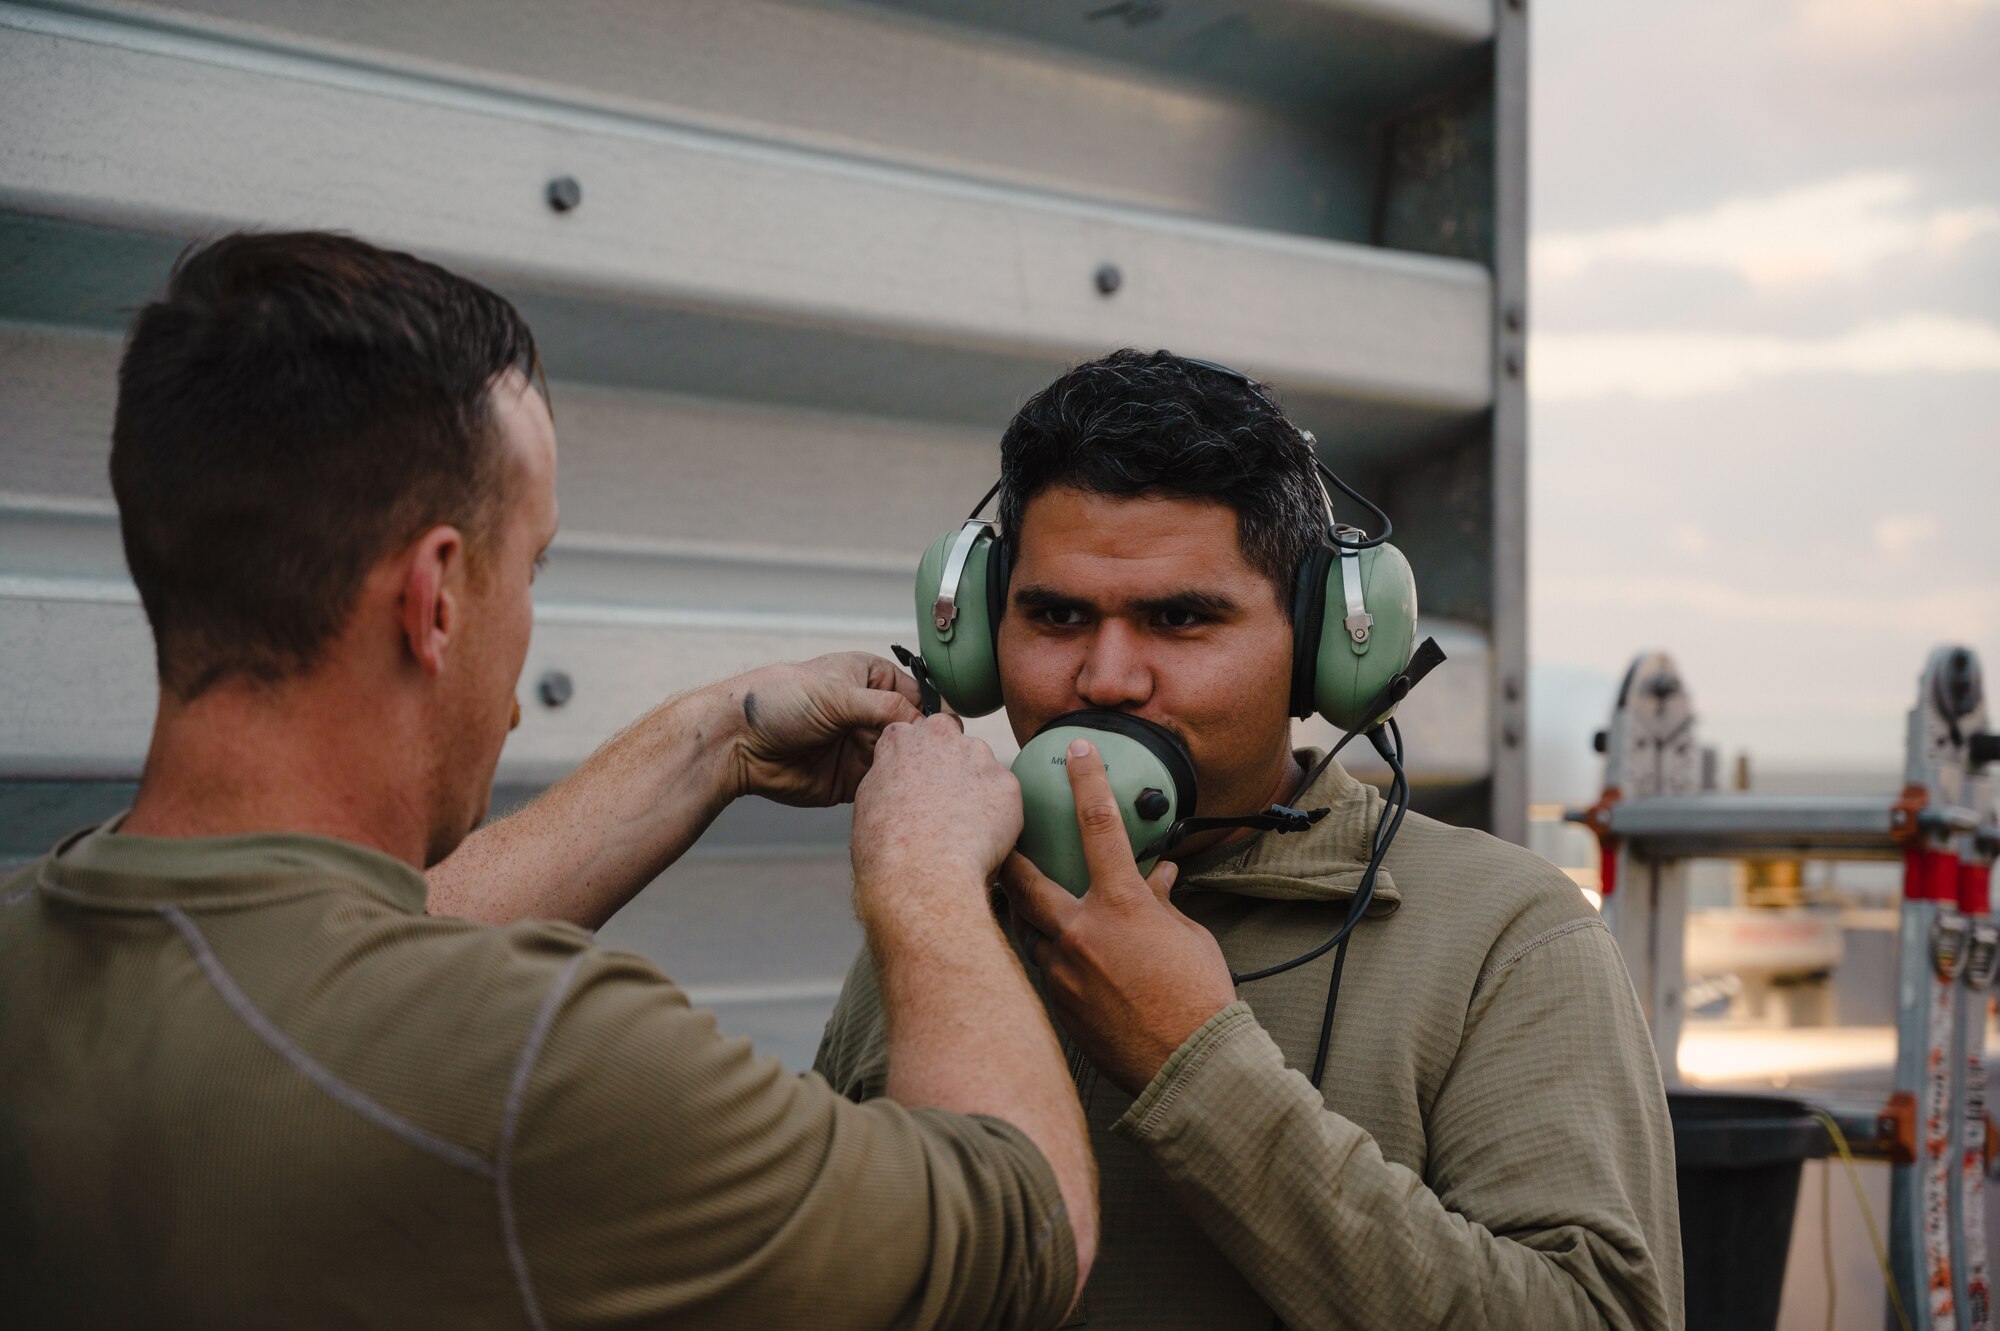 Senior Airman Dennis M. Hatcher, a crew chief with the 389th Expeditionary Fighter Squadron, adjusts a communication device on Senior Airman Hector J. Gomez, Jr., 332d Expeditionary Logistics Readiness Squadron Fuels Management Flight as part of the “Maintainer for a Day” program at an undisclosed location, Nov. 10, 2022. Maintainer for a Day is an initiative that pairs Airmen across a variety of career fields with members of aircraft maintenance shops for a hands-on learning experience with F-15E Strike Eagle fighter jets. (U.S. Air Force photo by Tech. Sgt. Richard Mekkri)